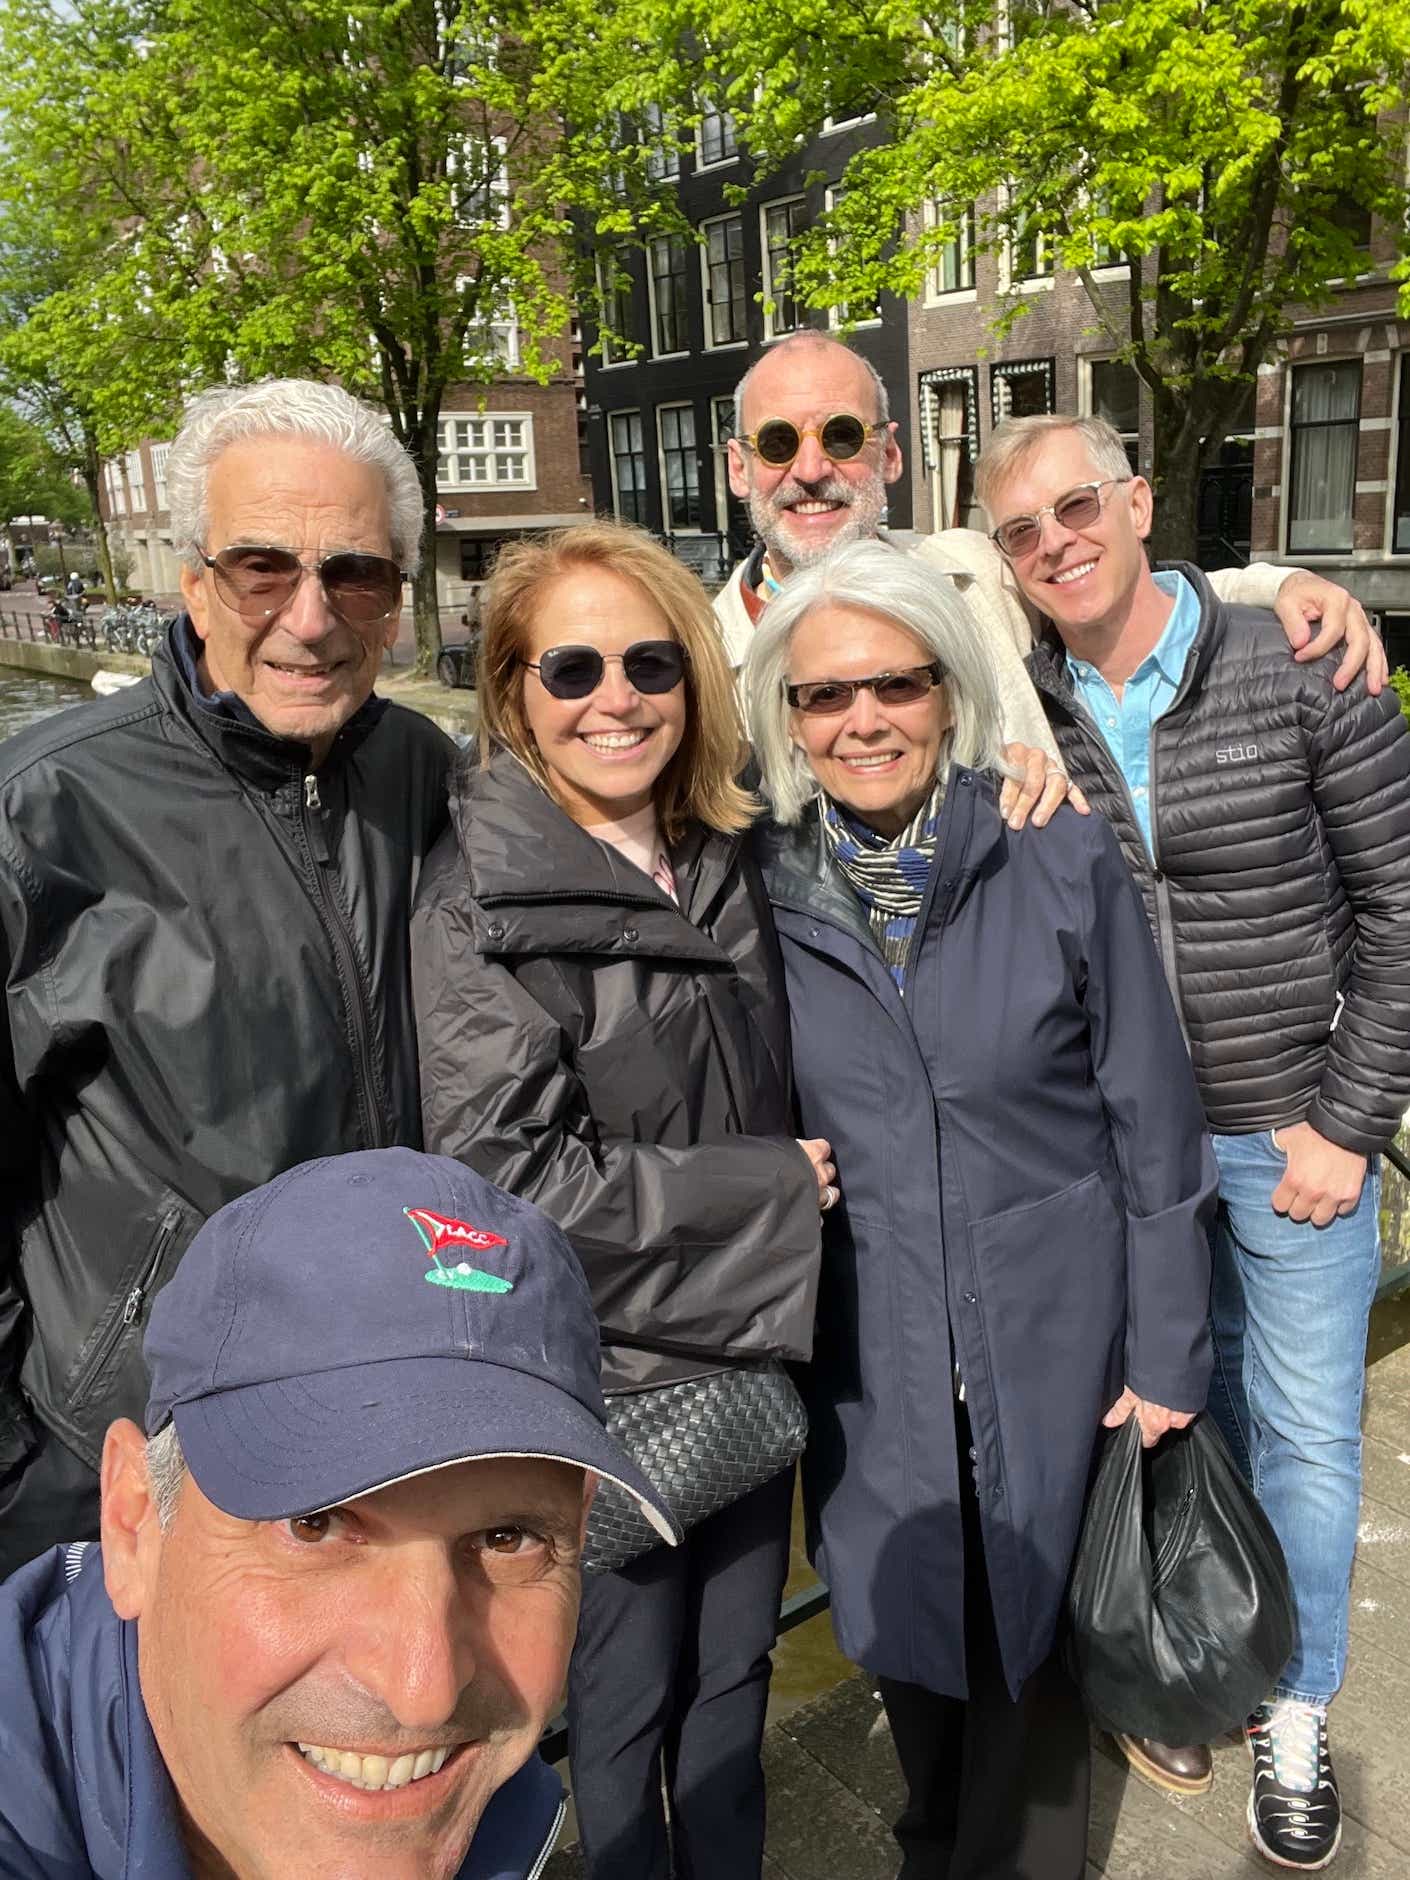 Katie Couric, John Molner, and his family in Amsterdam